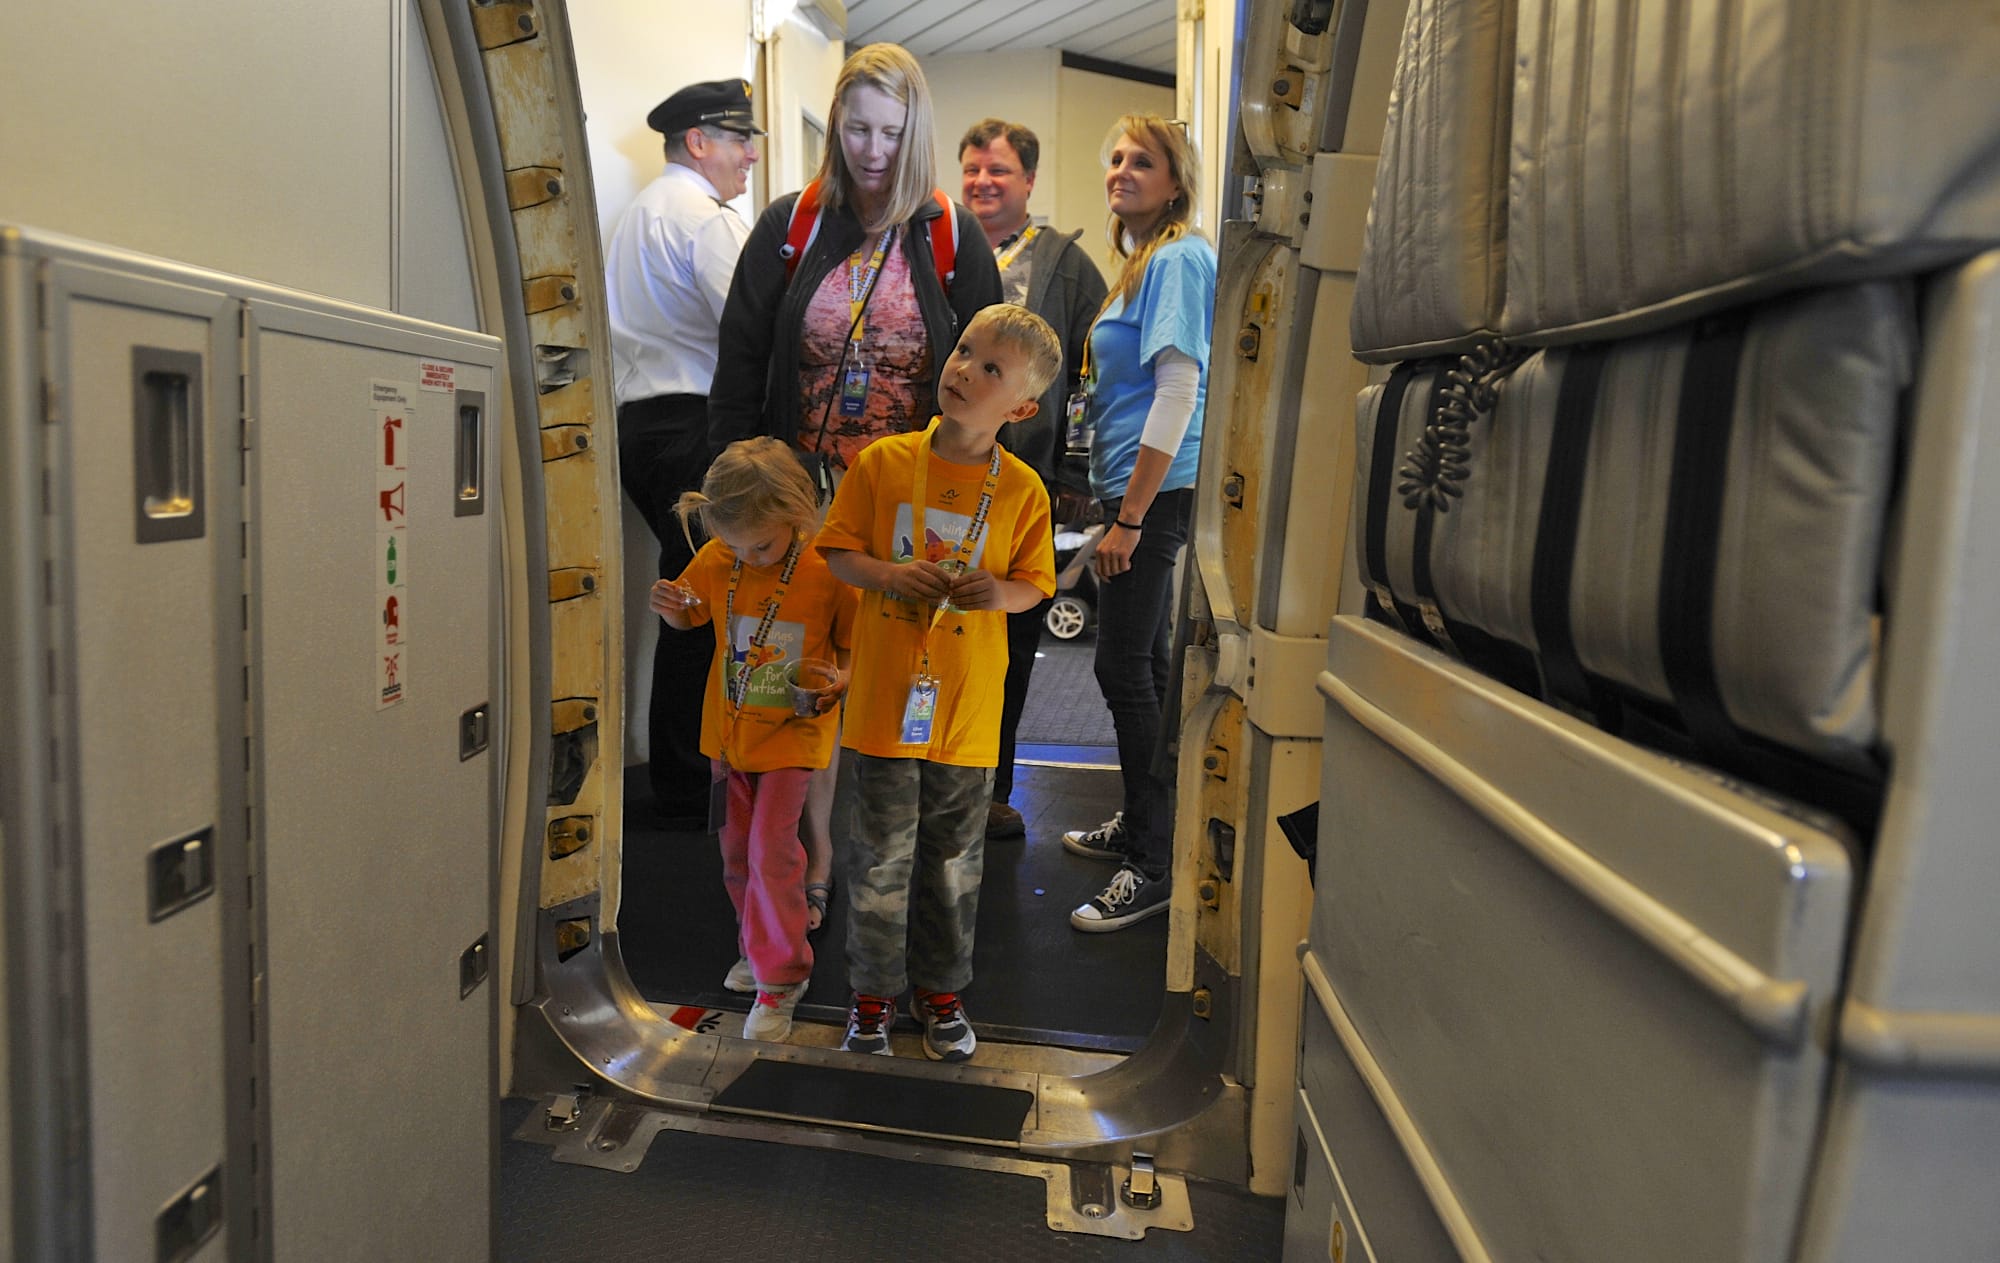 Elliott Beaver, center, and Abby Beaver board the plane as Alaska Airlines hosts a Wings for Autism event at PDX in Portland, Ore., Saturday Sept 26, 2015.